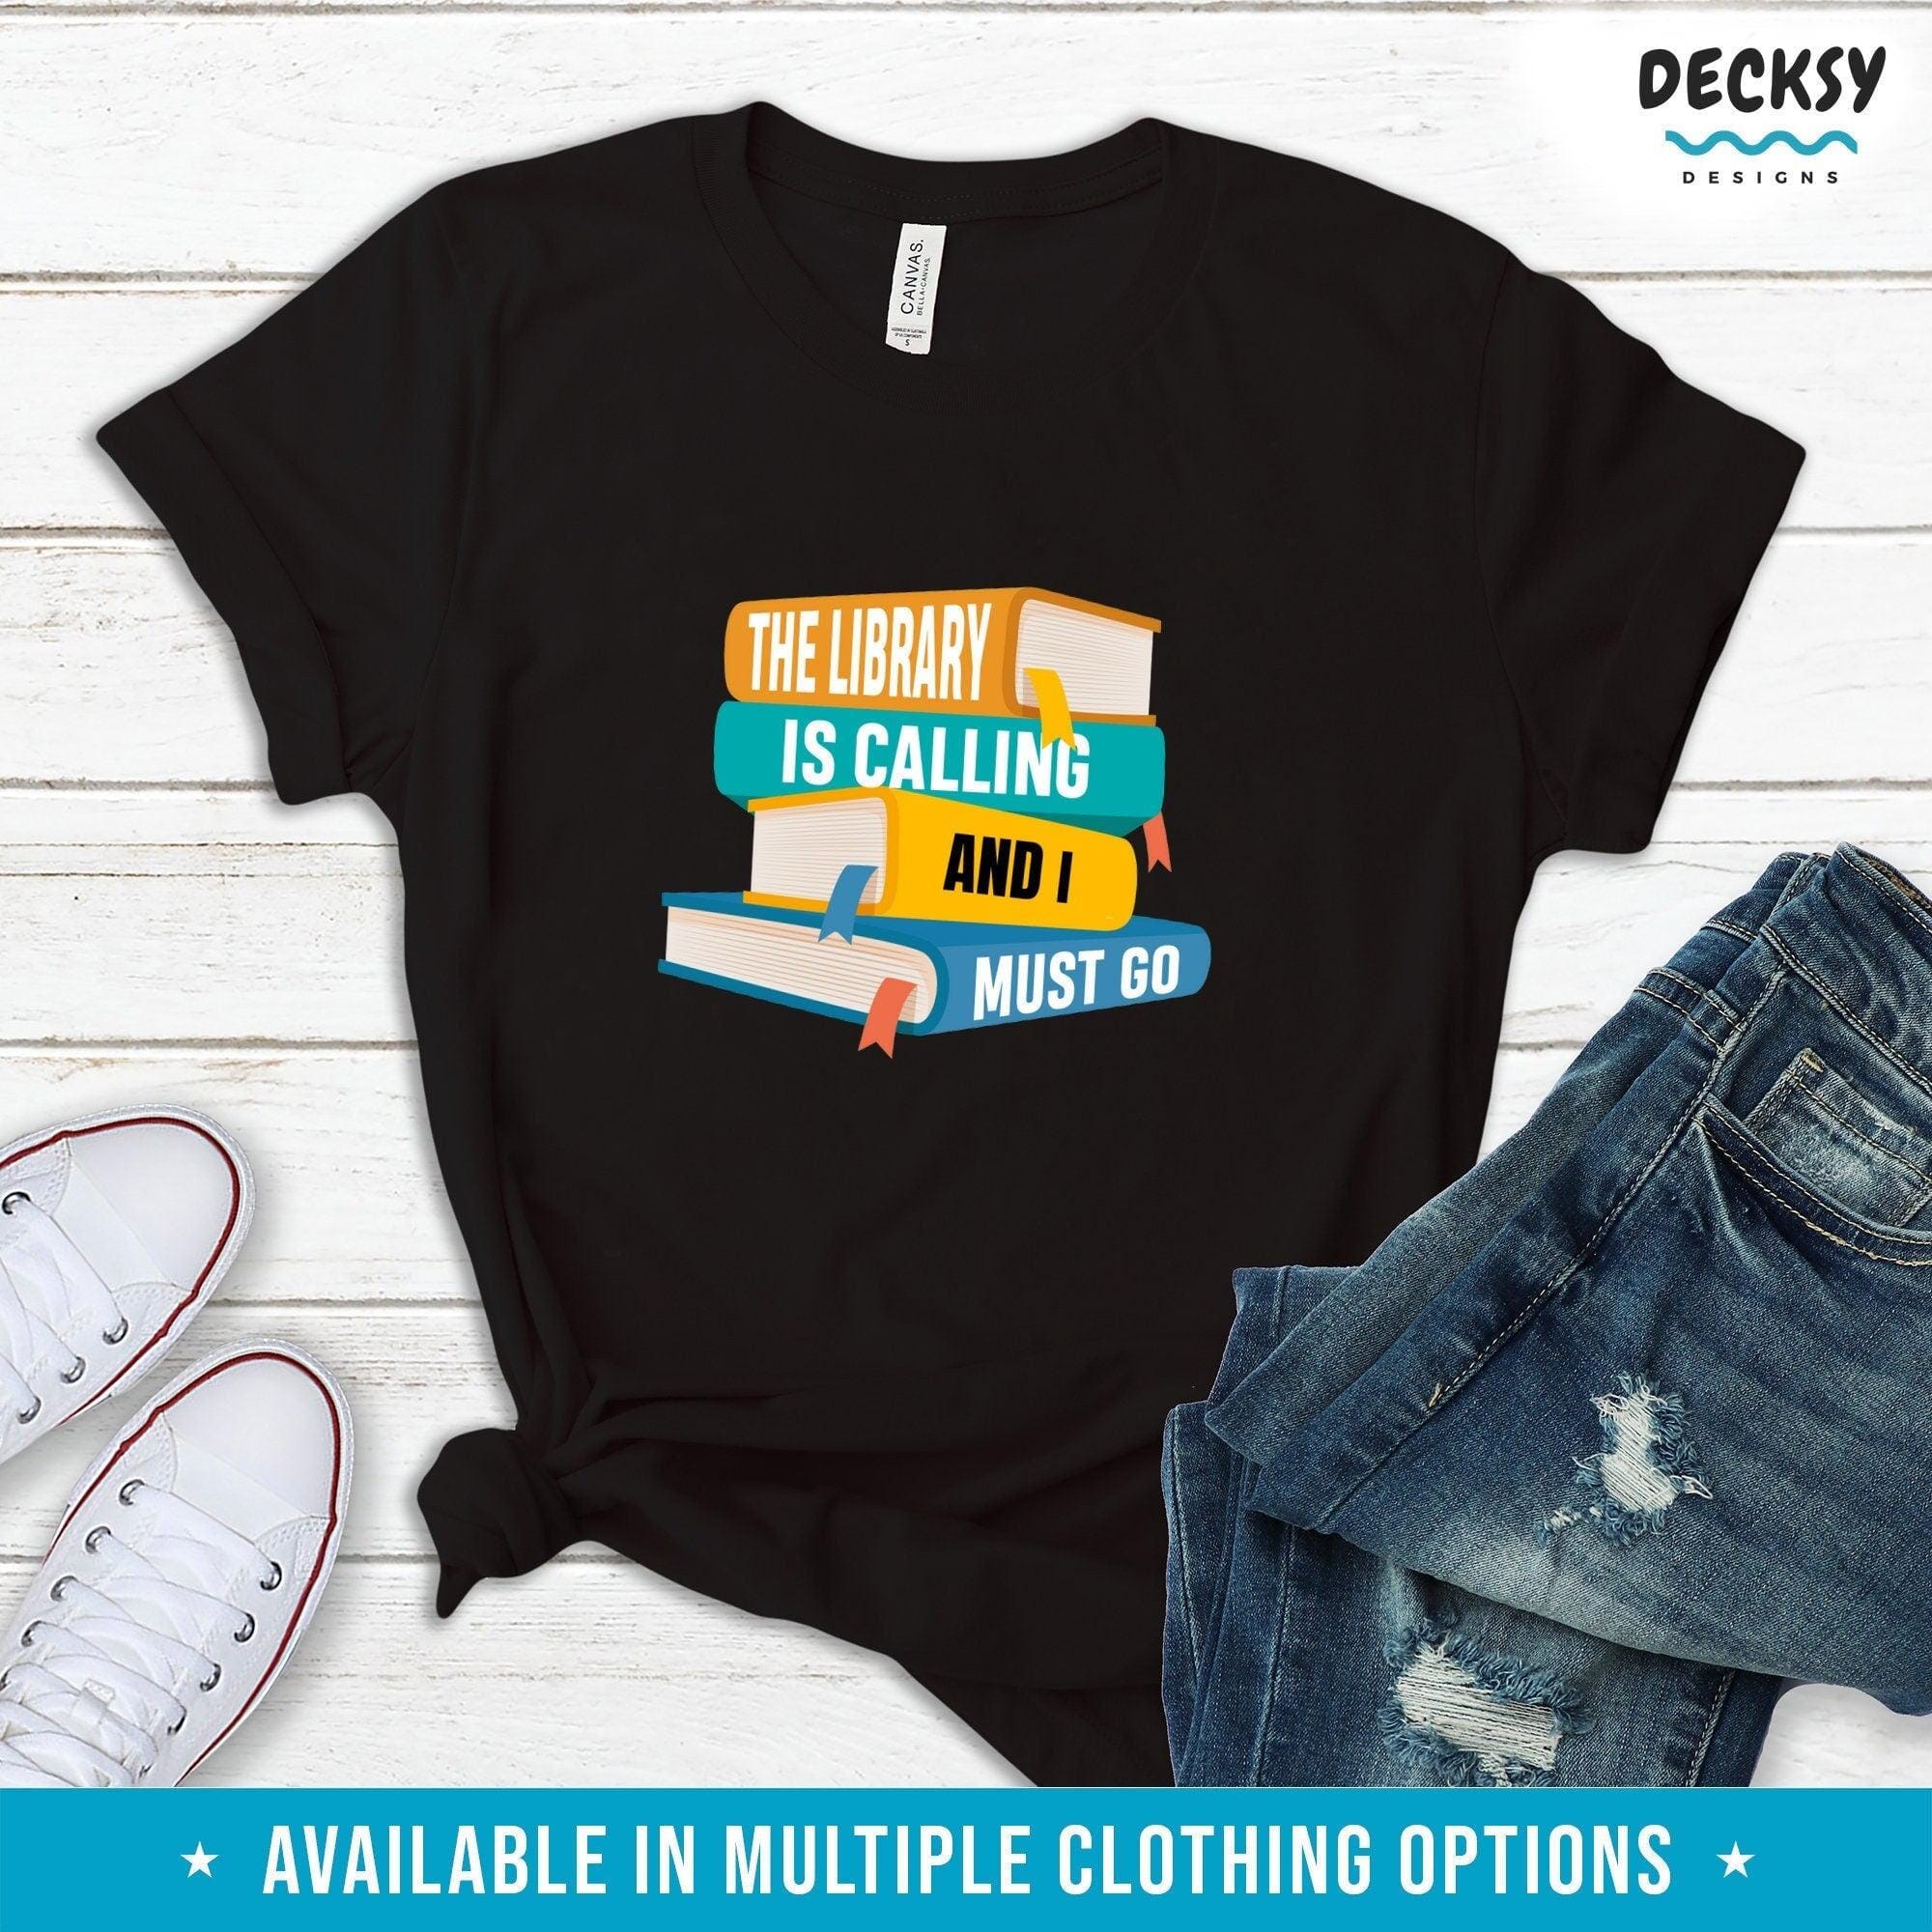 Library Shirt Funny, Reading Club Gift-Clothing:Gender-Neutral Adult Clothing:Tops & Tees:T-shirts:Graphic Tees-DecksyDesigns